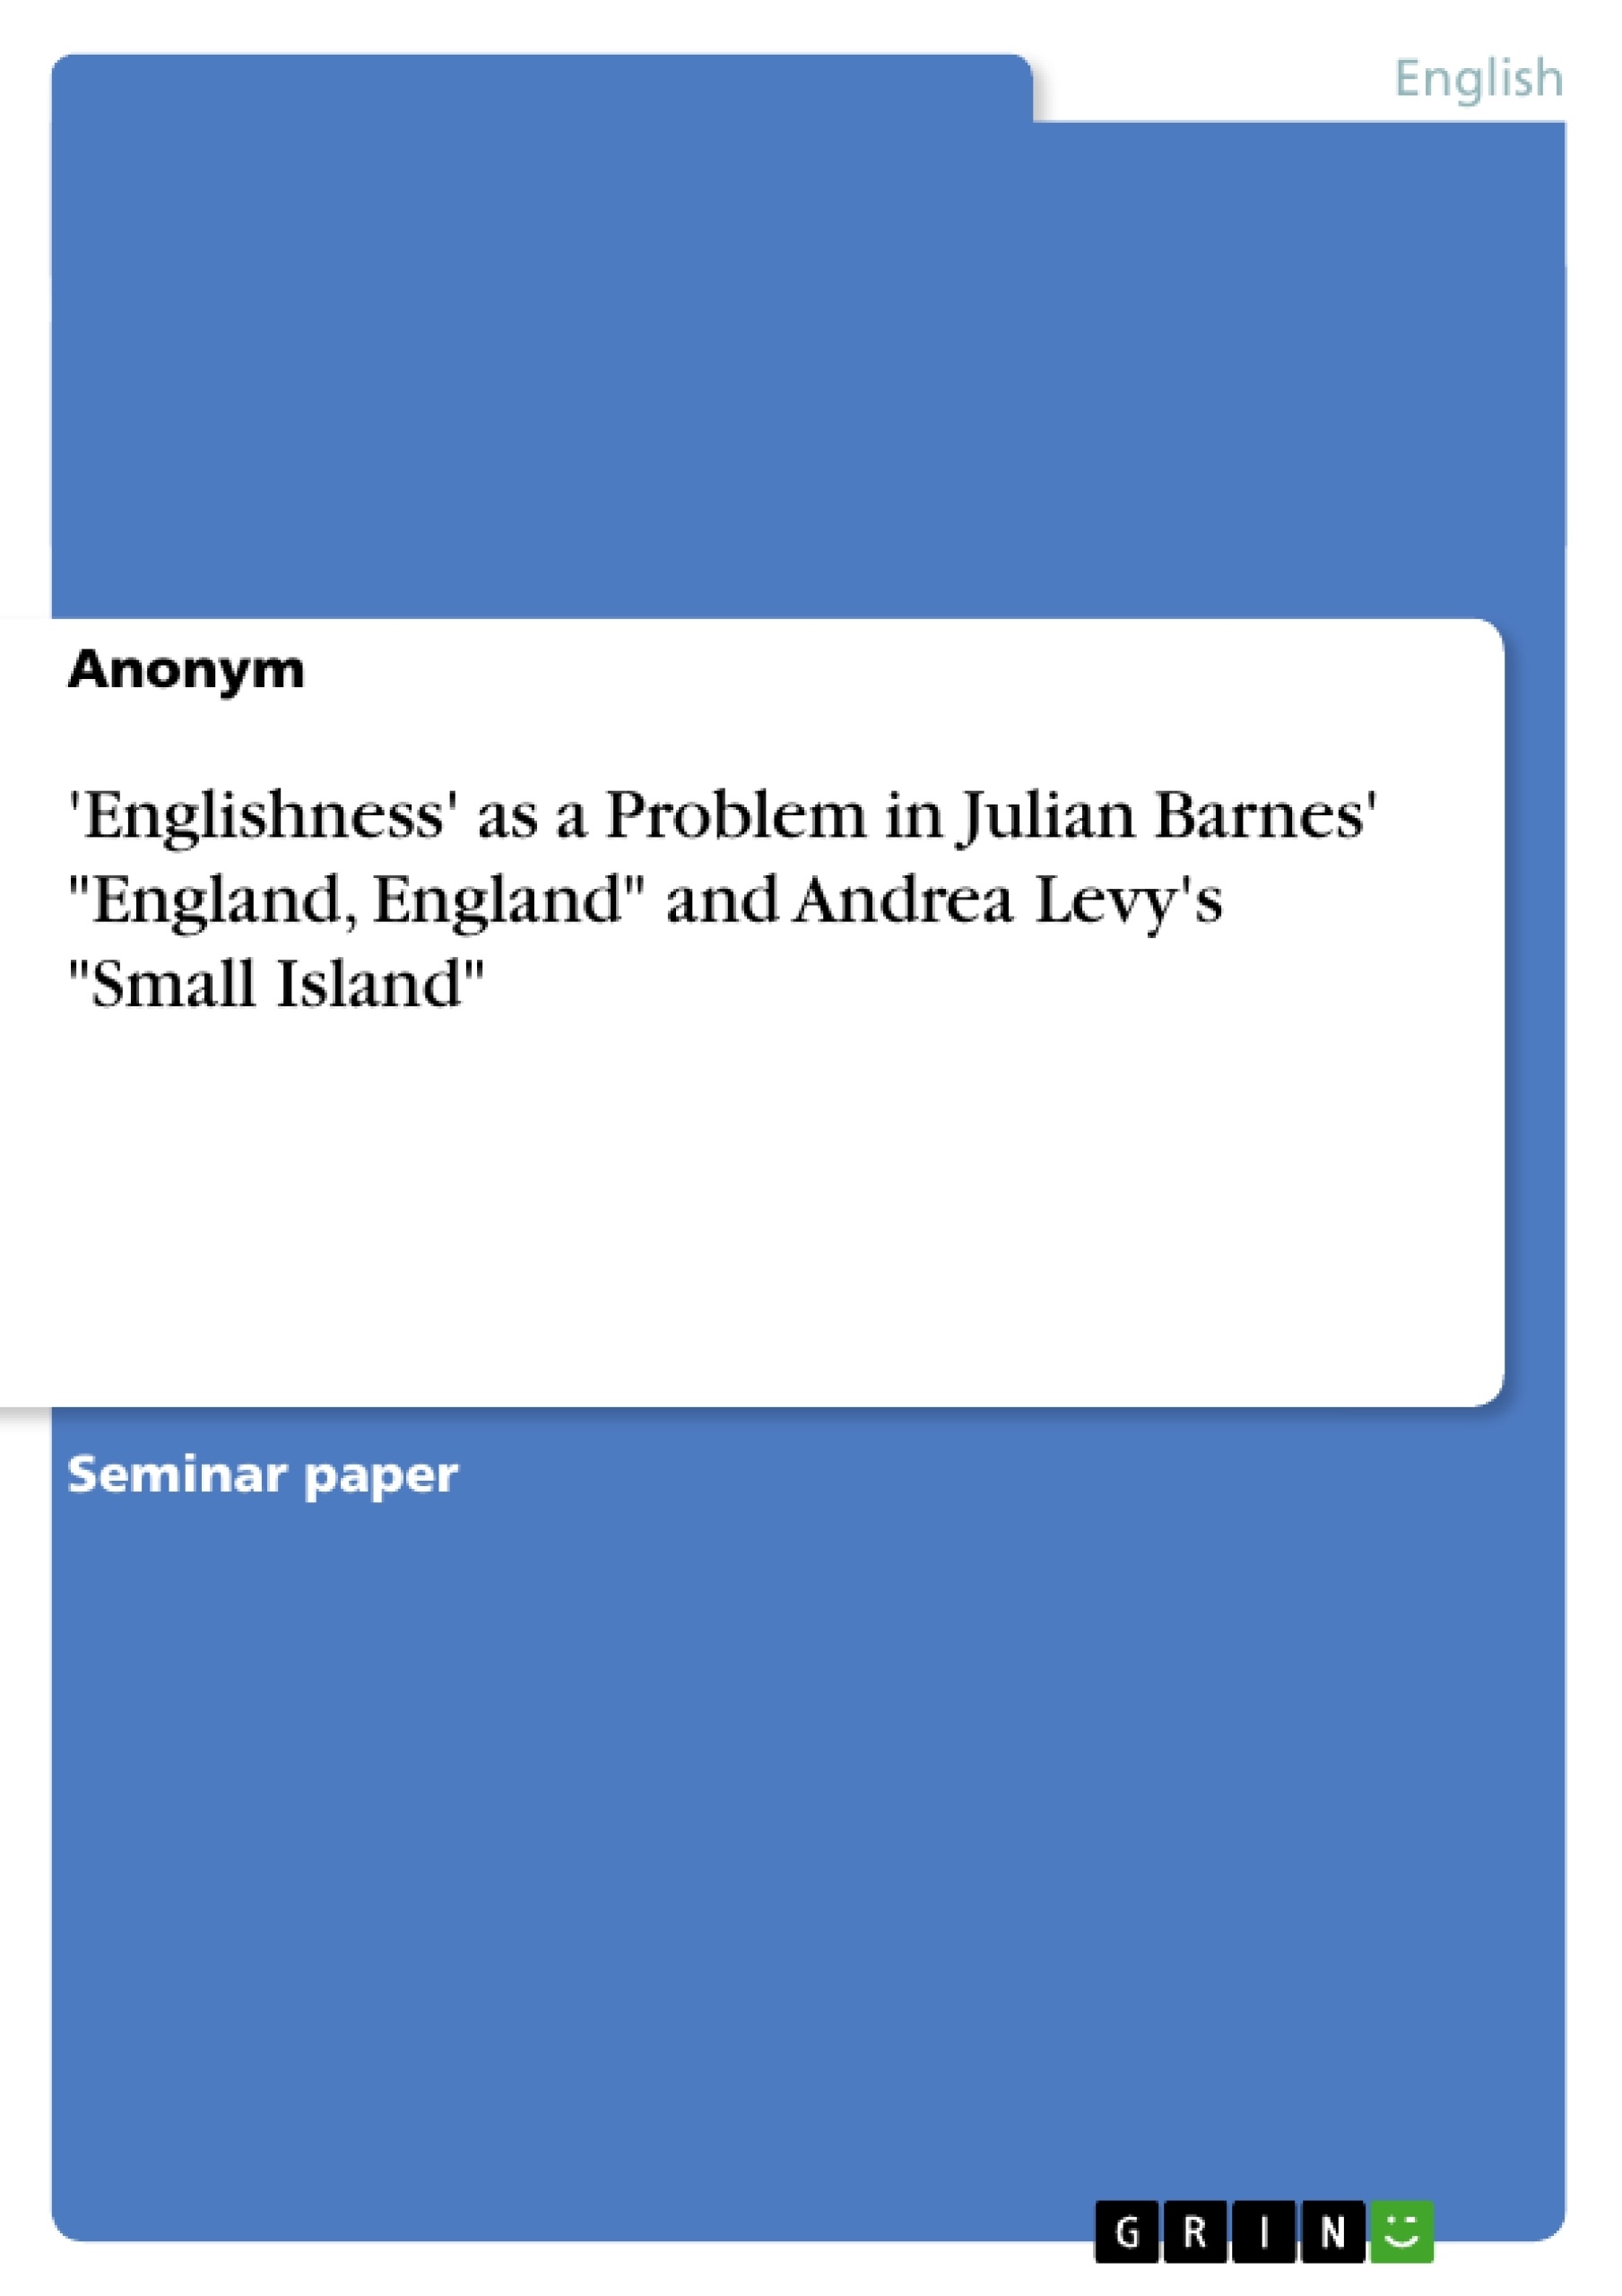 Título: 'Englishness' as a Problem in Julian Barnes' "England, England" and Andrea Levy's "Small Island"